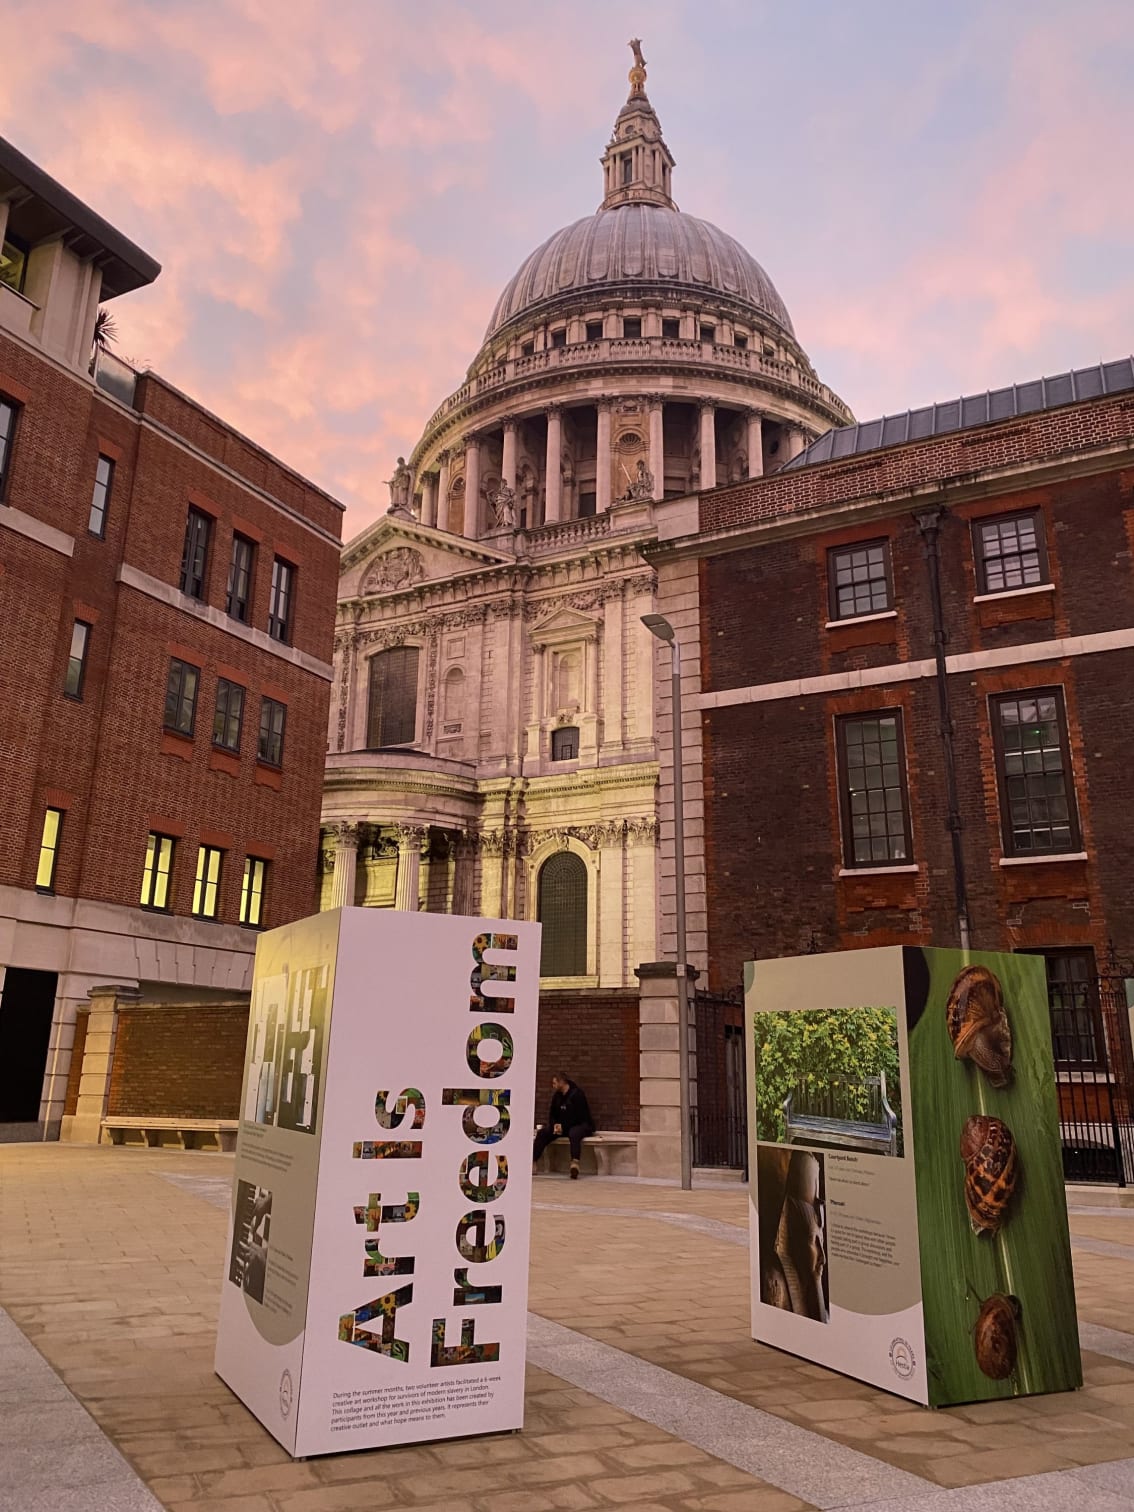 Art Is Freedom at Paternoster Square